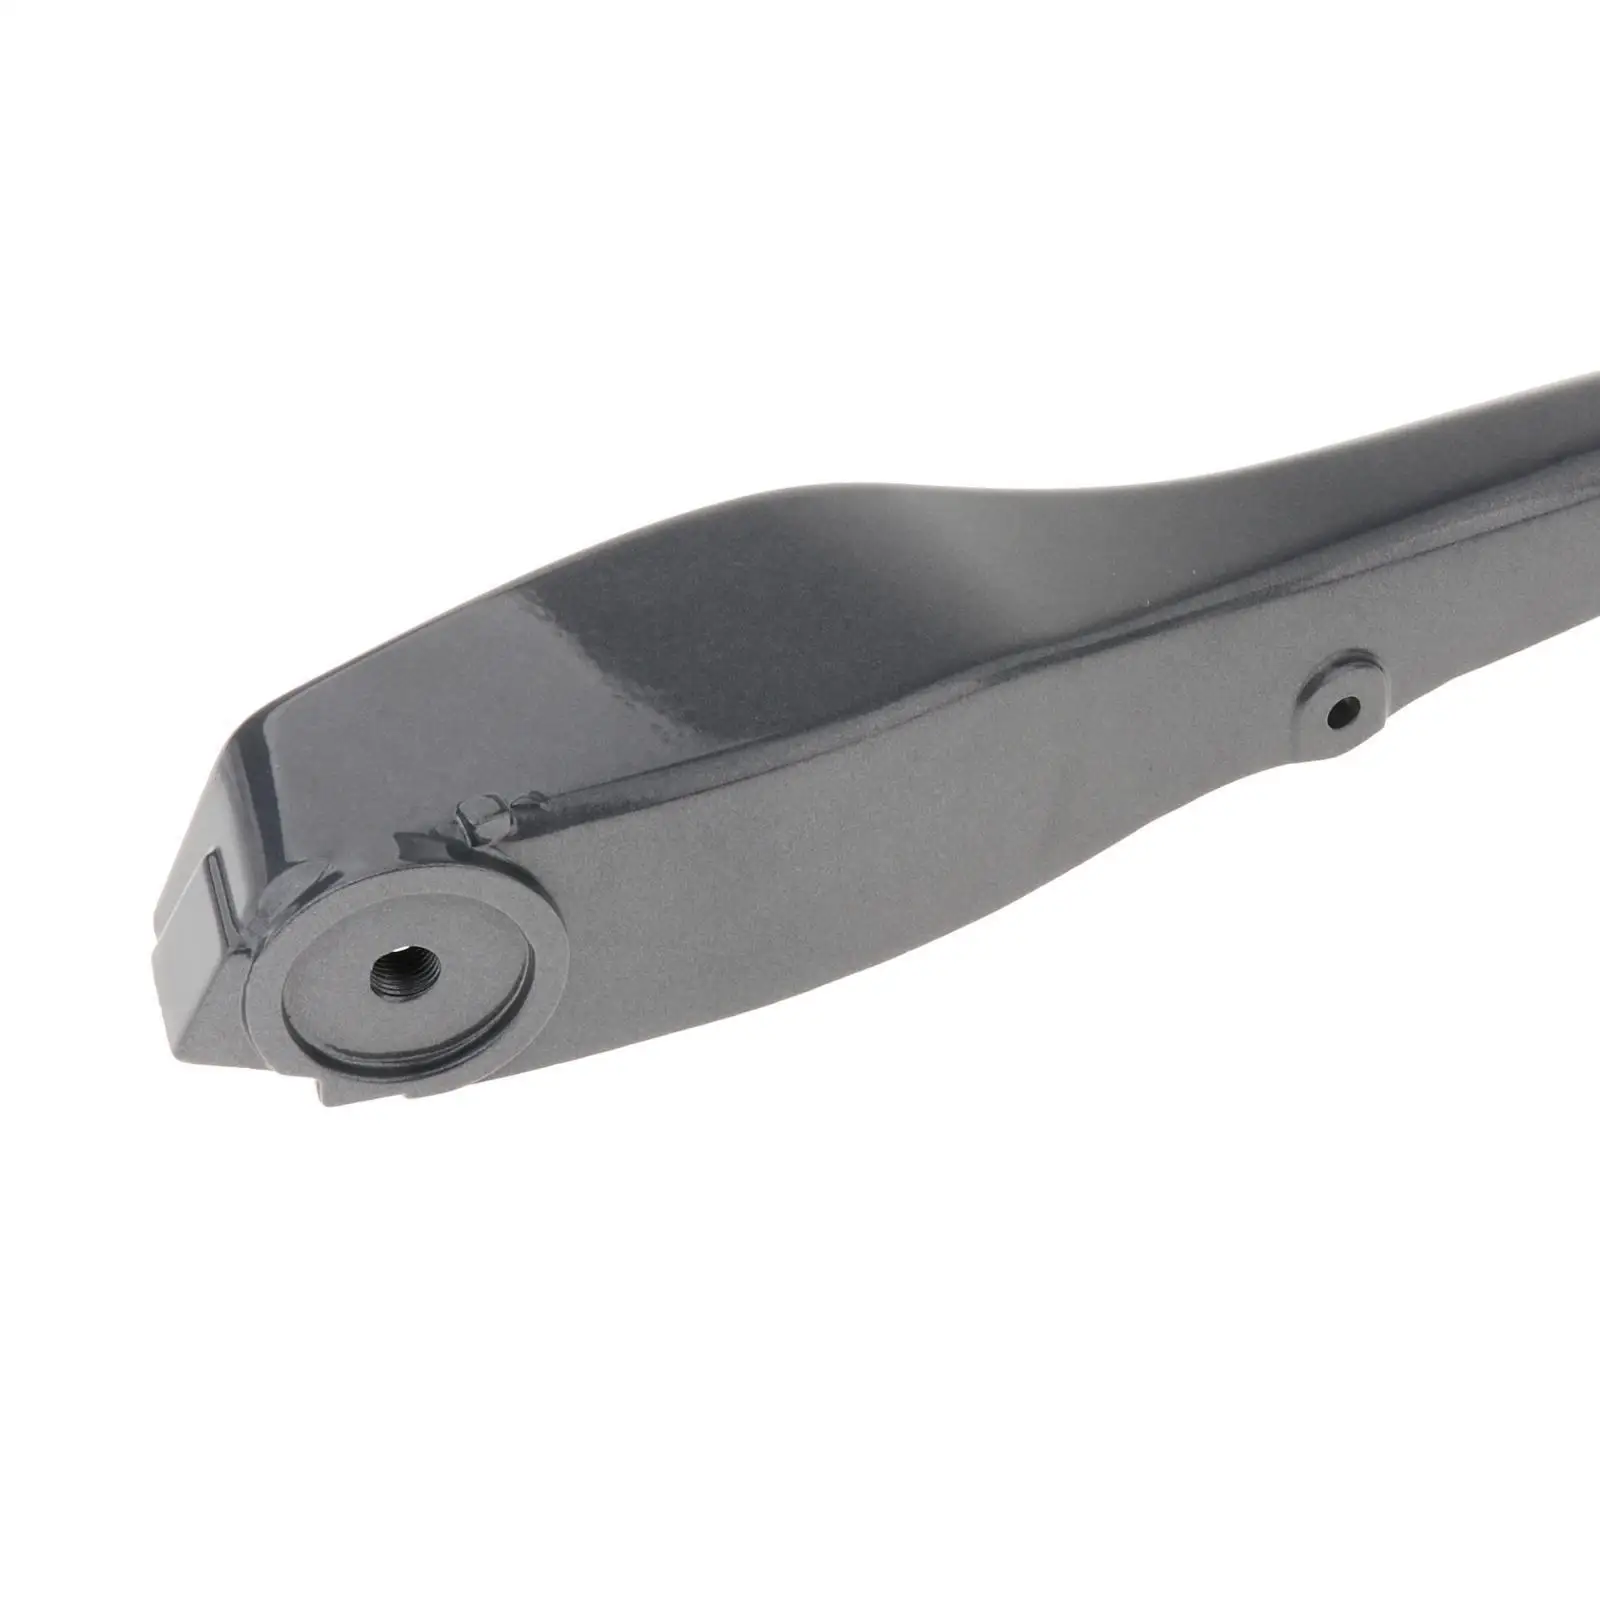 676-42111 Steering Handle Fit for  Outboard Motor 2-Stroke 40HP E40J E40G 6F5 6F6 676-42111-03, Easy to Install